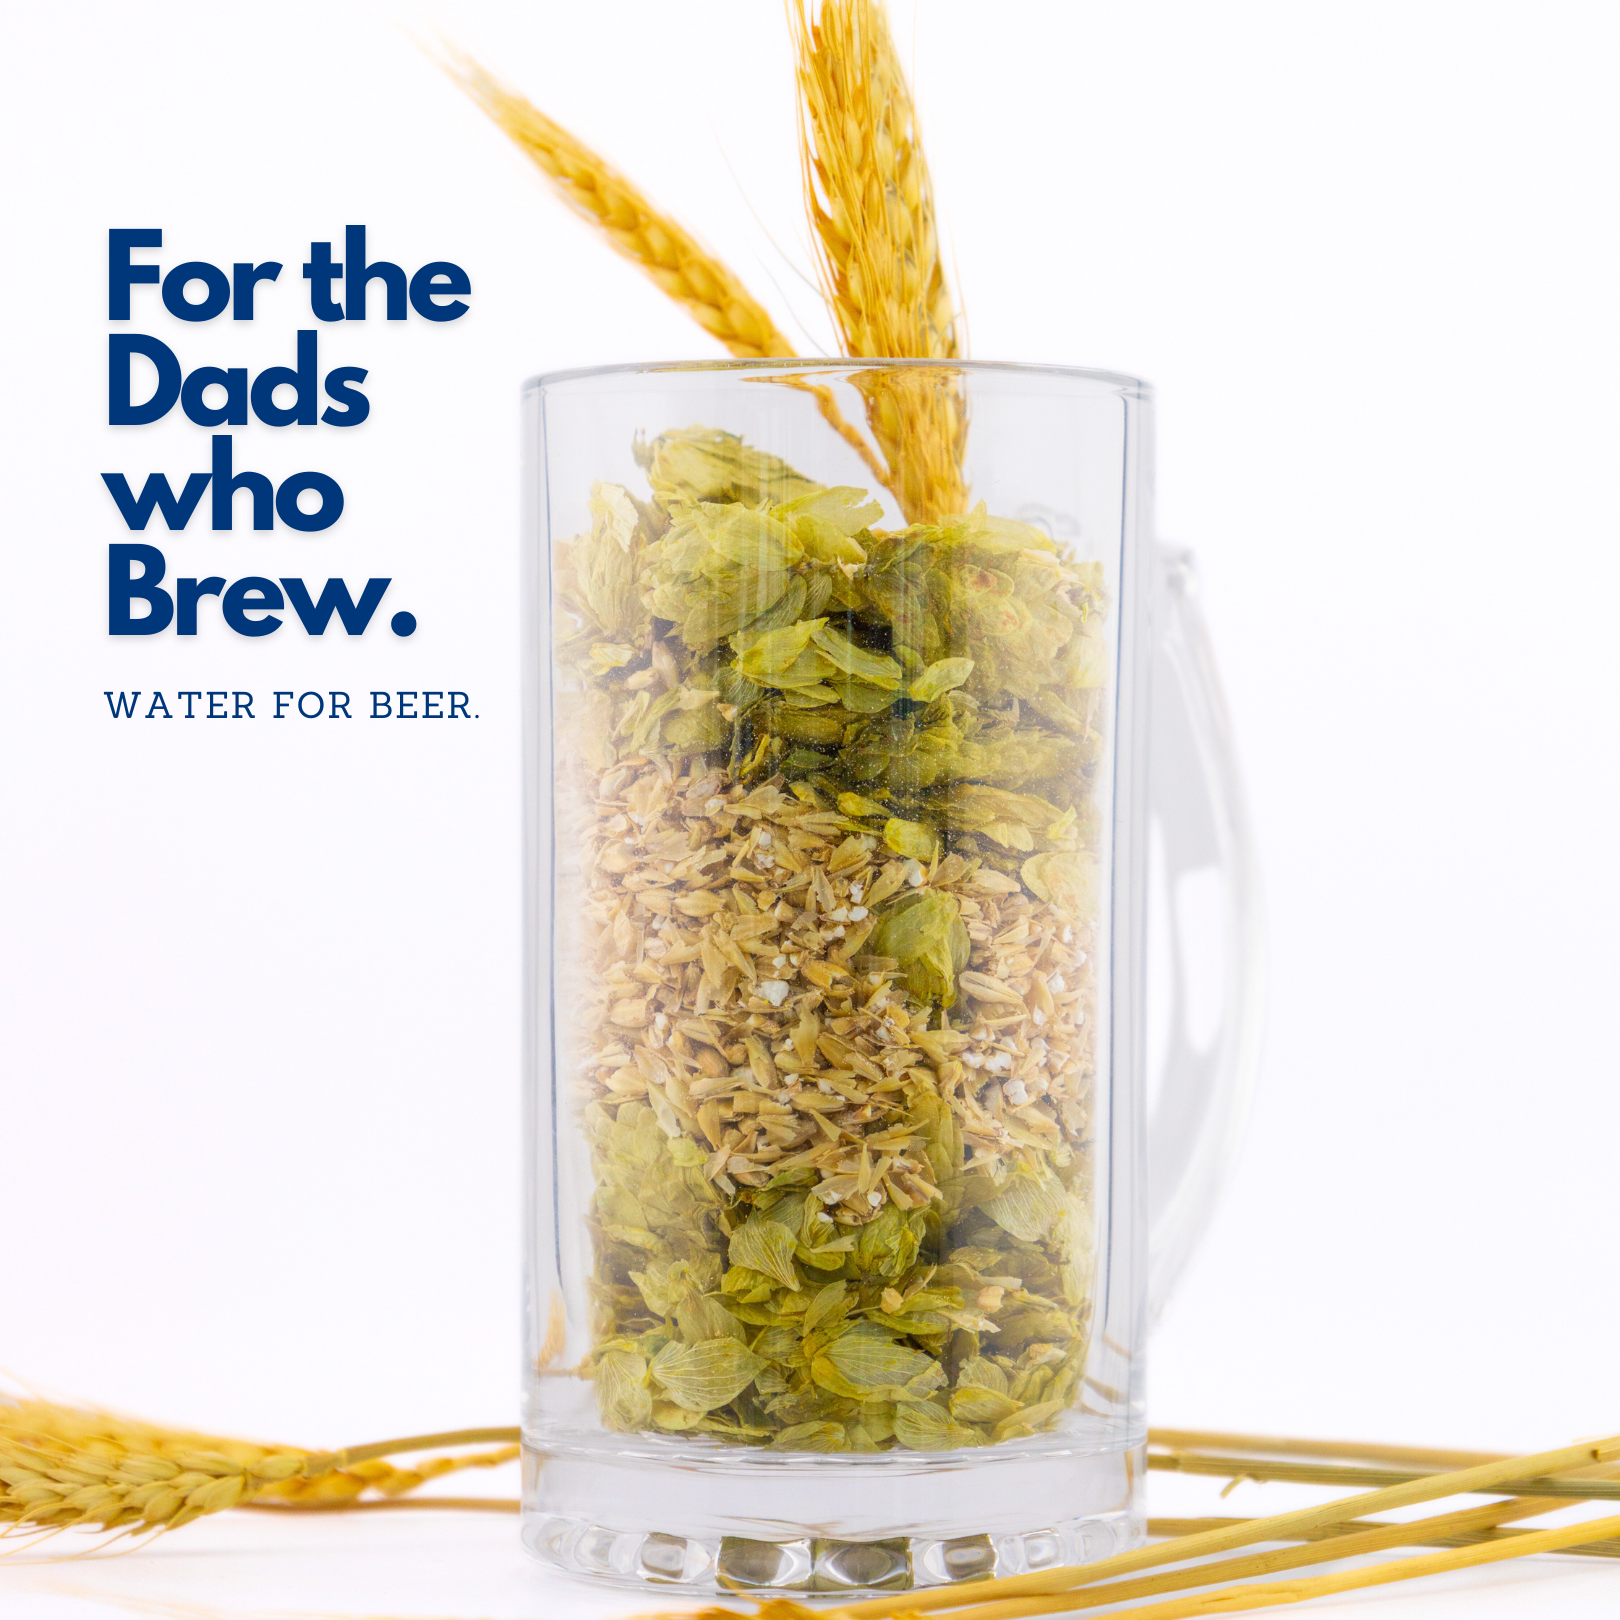 US Water Brewt Portable homebrewing water treatment solution